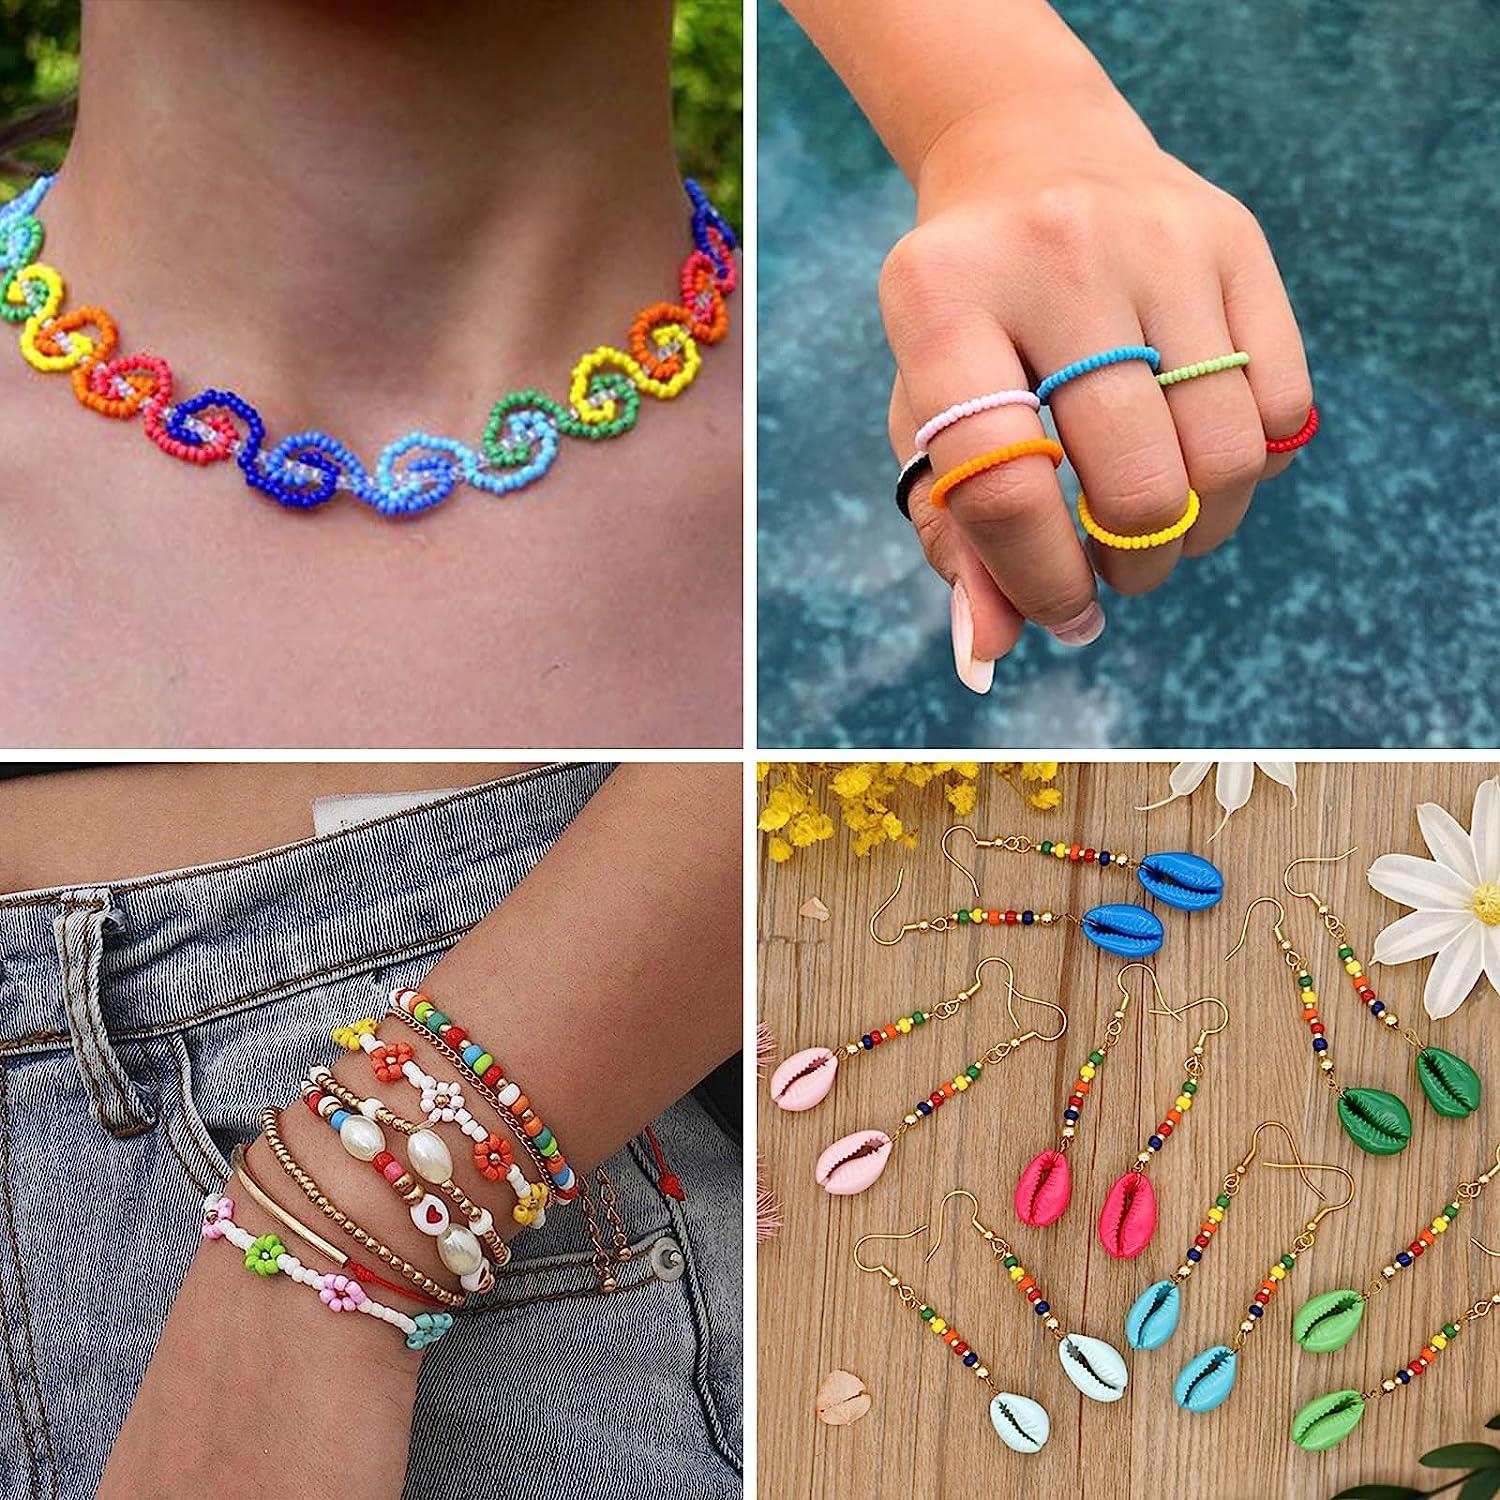 Seed Beads for Bracelets Colored Small Glass Beads for Bracelets Jewelry Making, Girl's